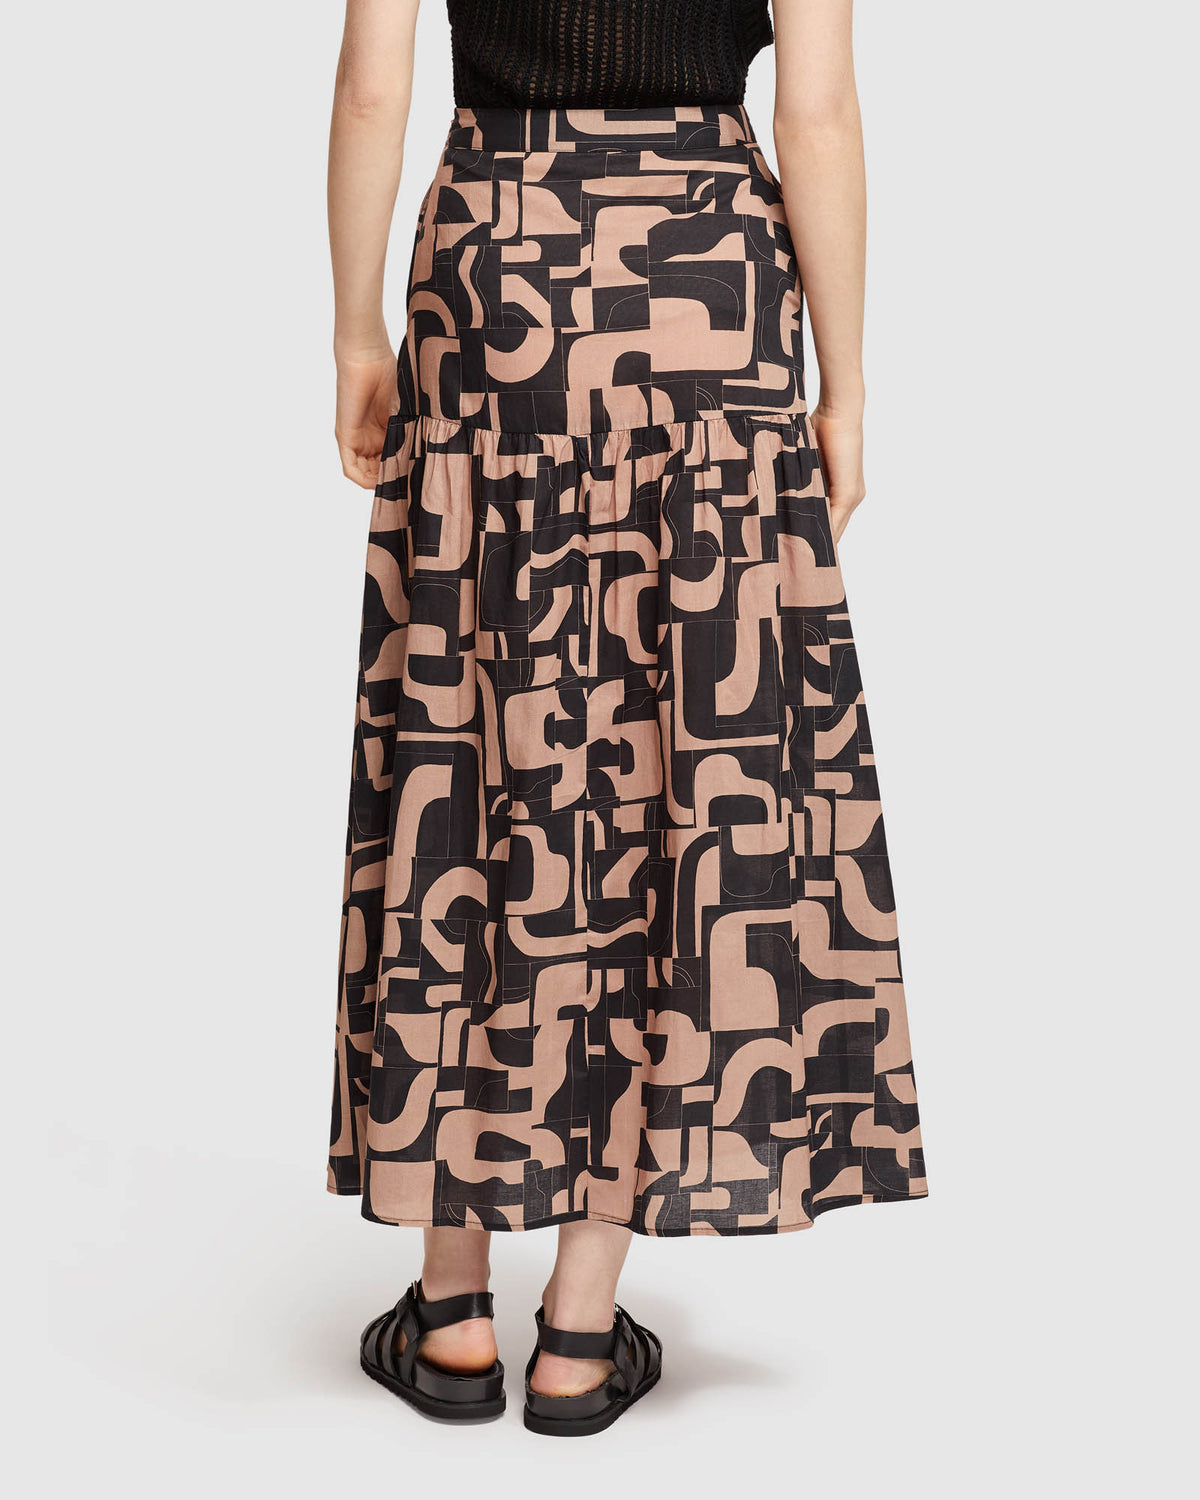 OLIVIA GEO PRINT VOILE SKIRT - AVAILABLE ~ 1-2 weeks WOMENS SKIRTS